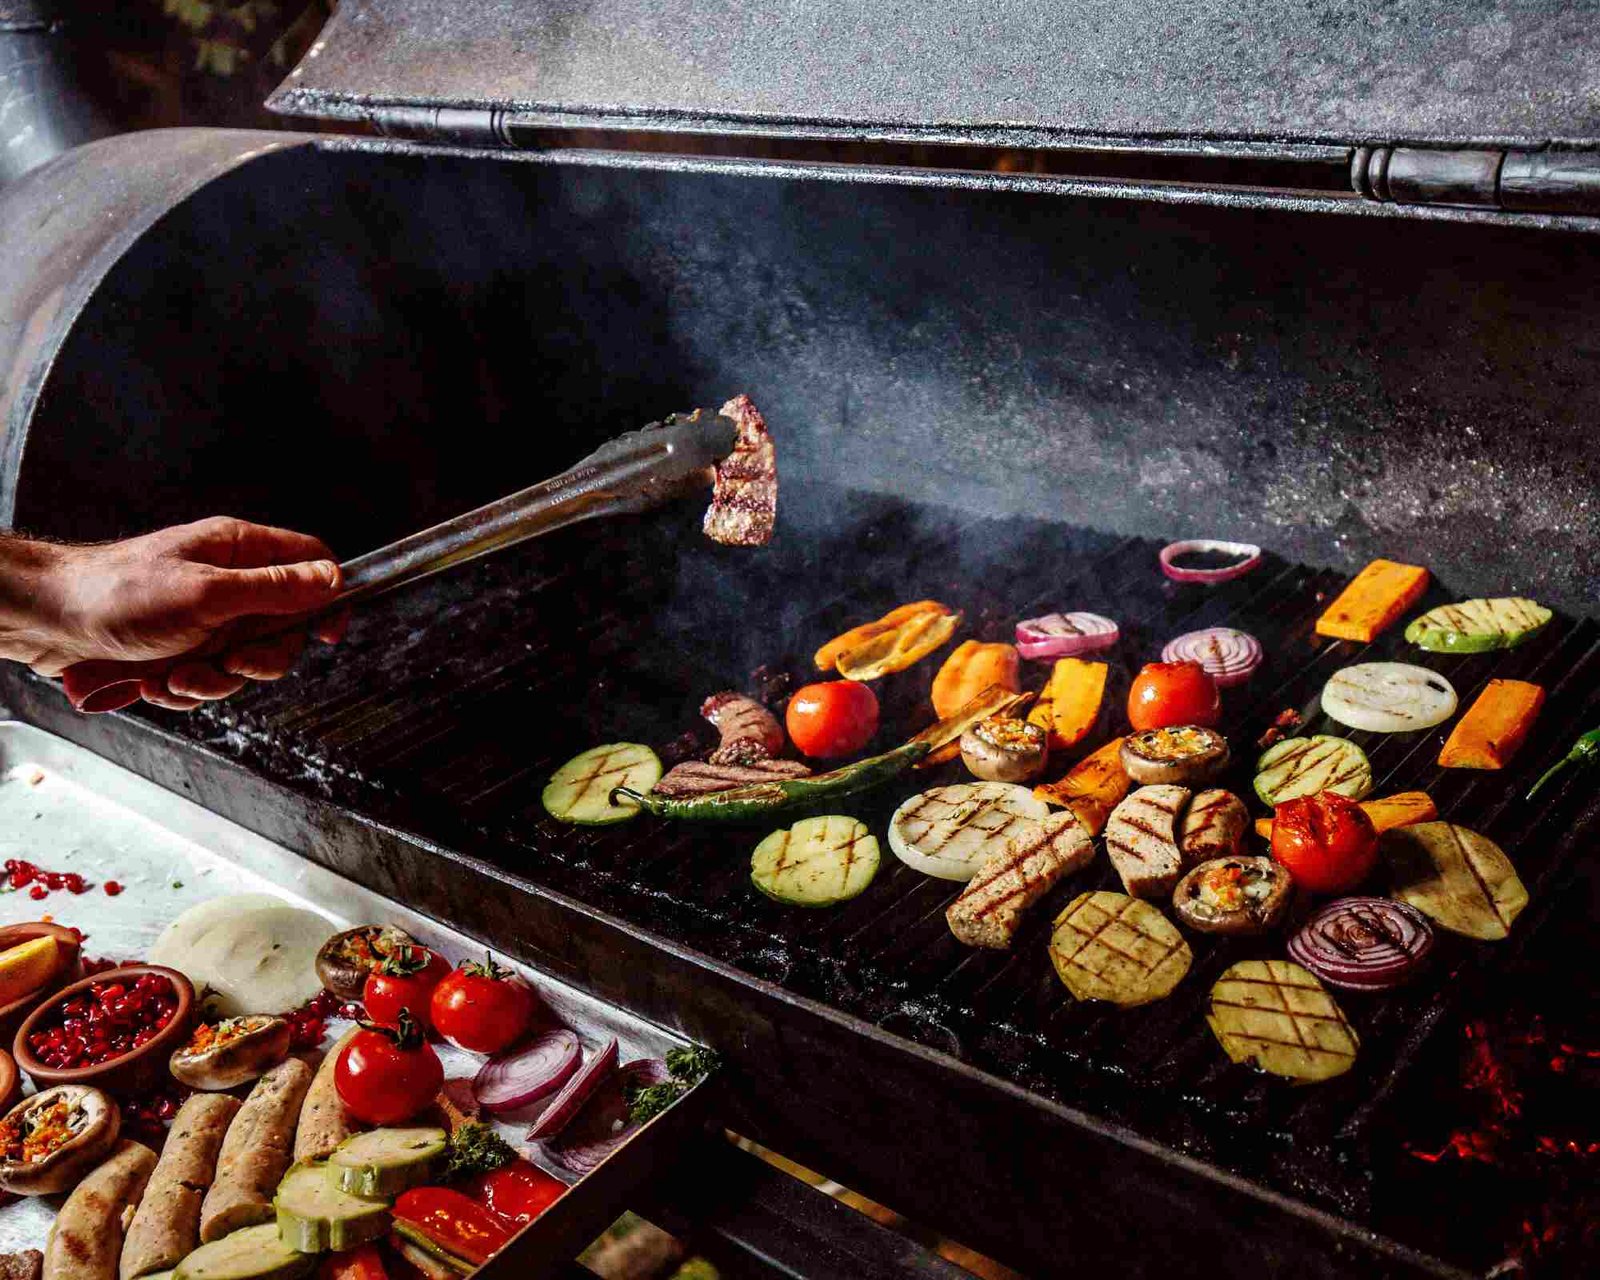 Beyond Meat: Grilling Tofu and Plant-Based Proteins on Charcoal